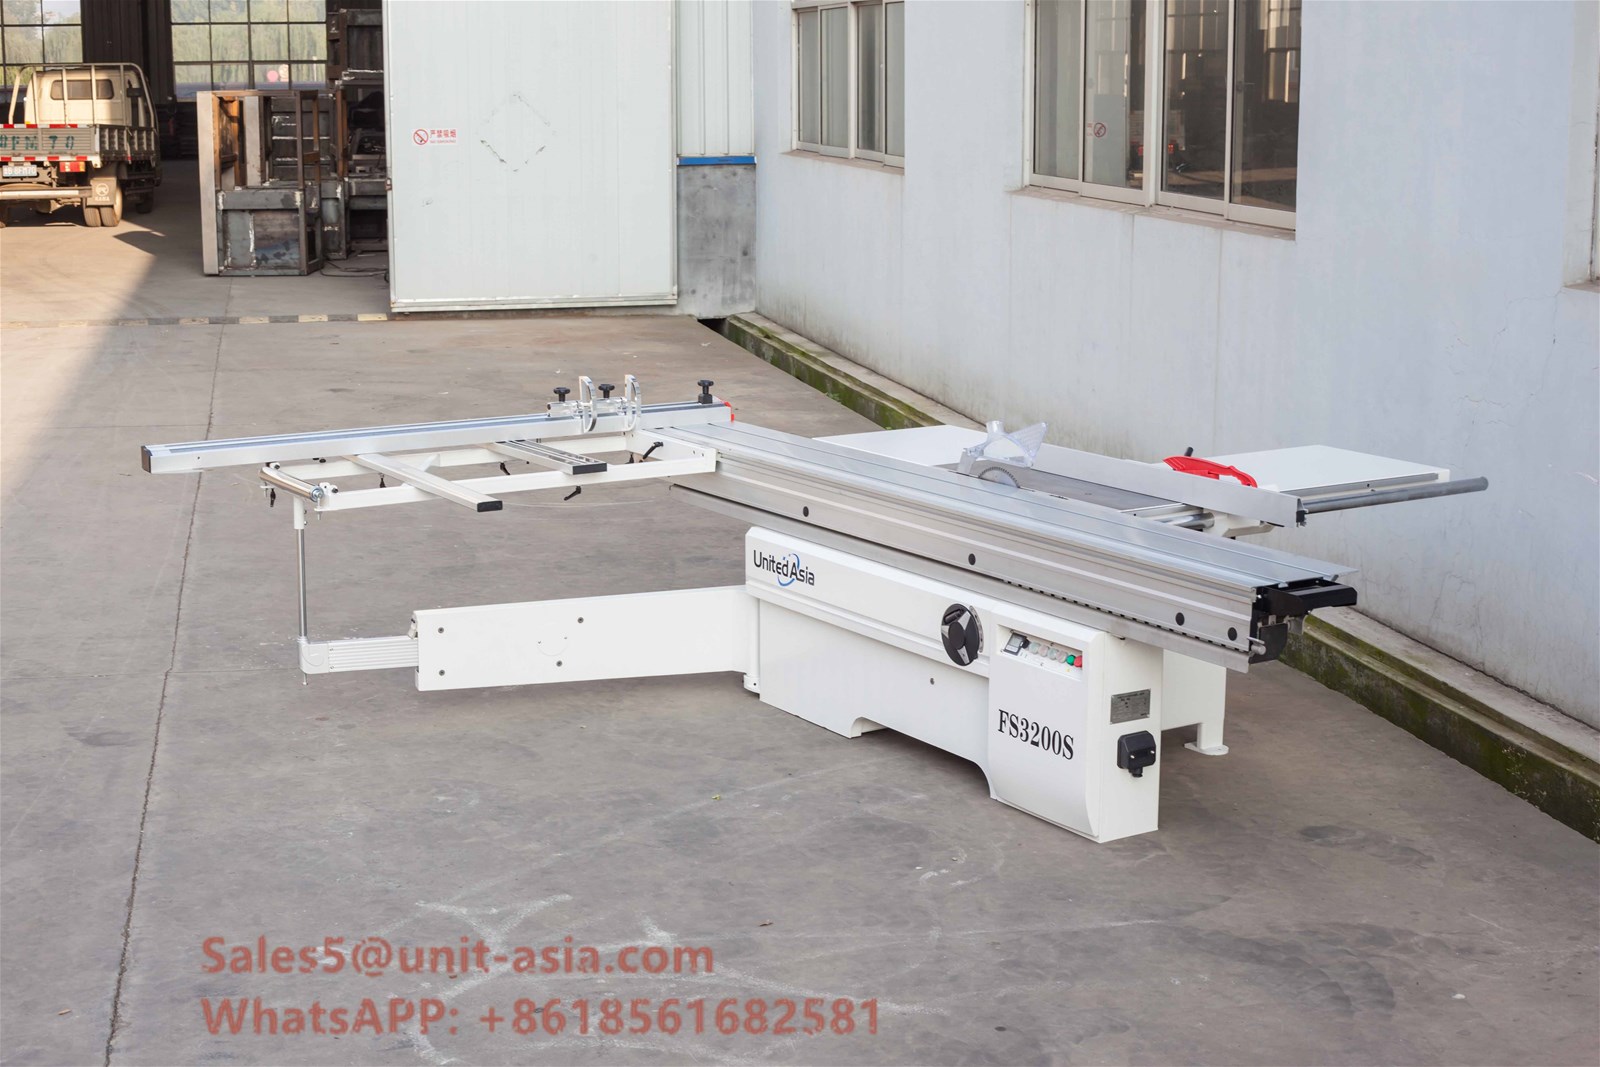 Qingdao Precision Cheap Price Auto Wood Cutting Sliding Table Machine for Woodworking